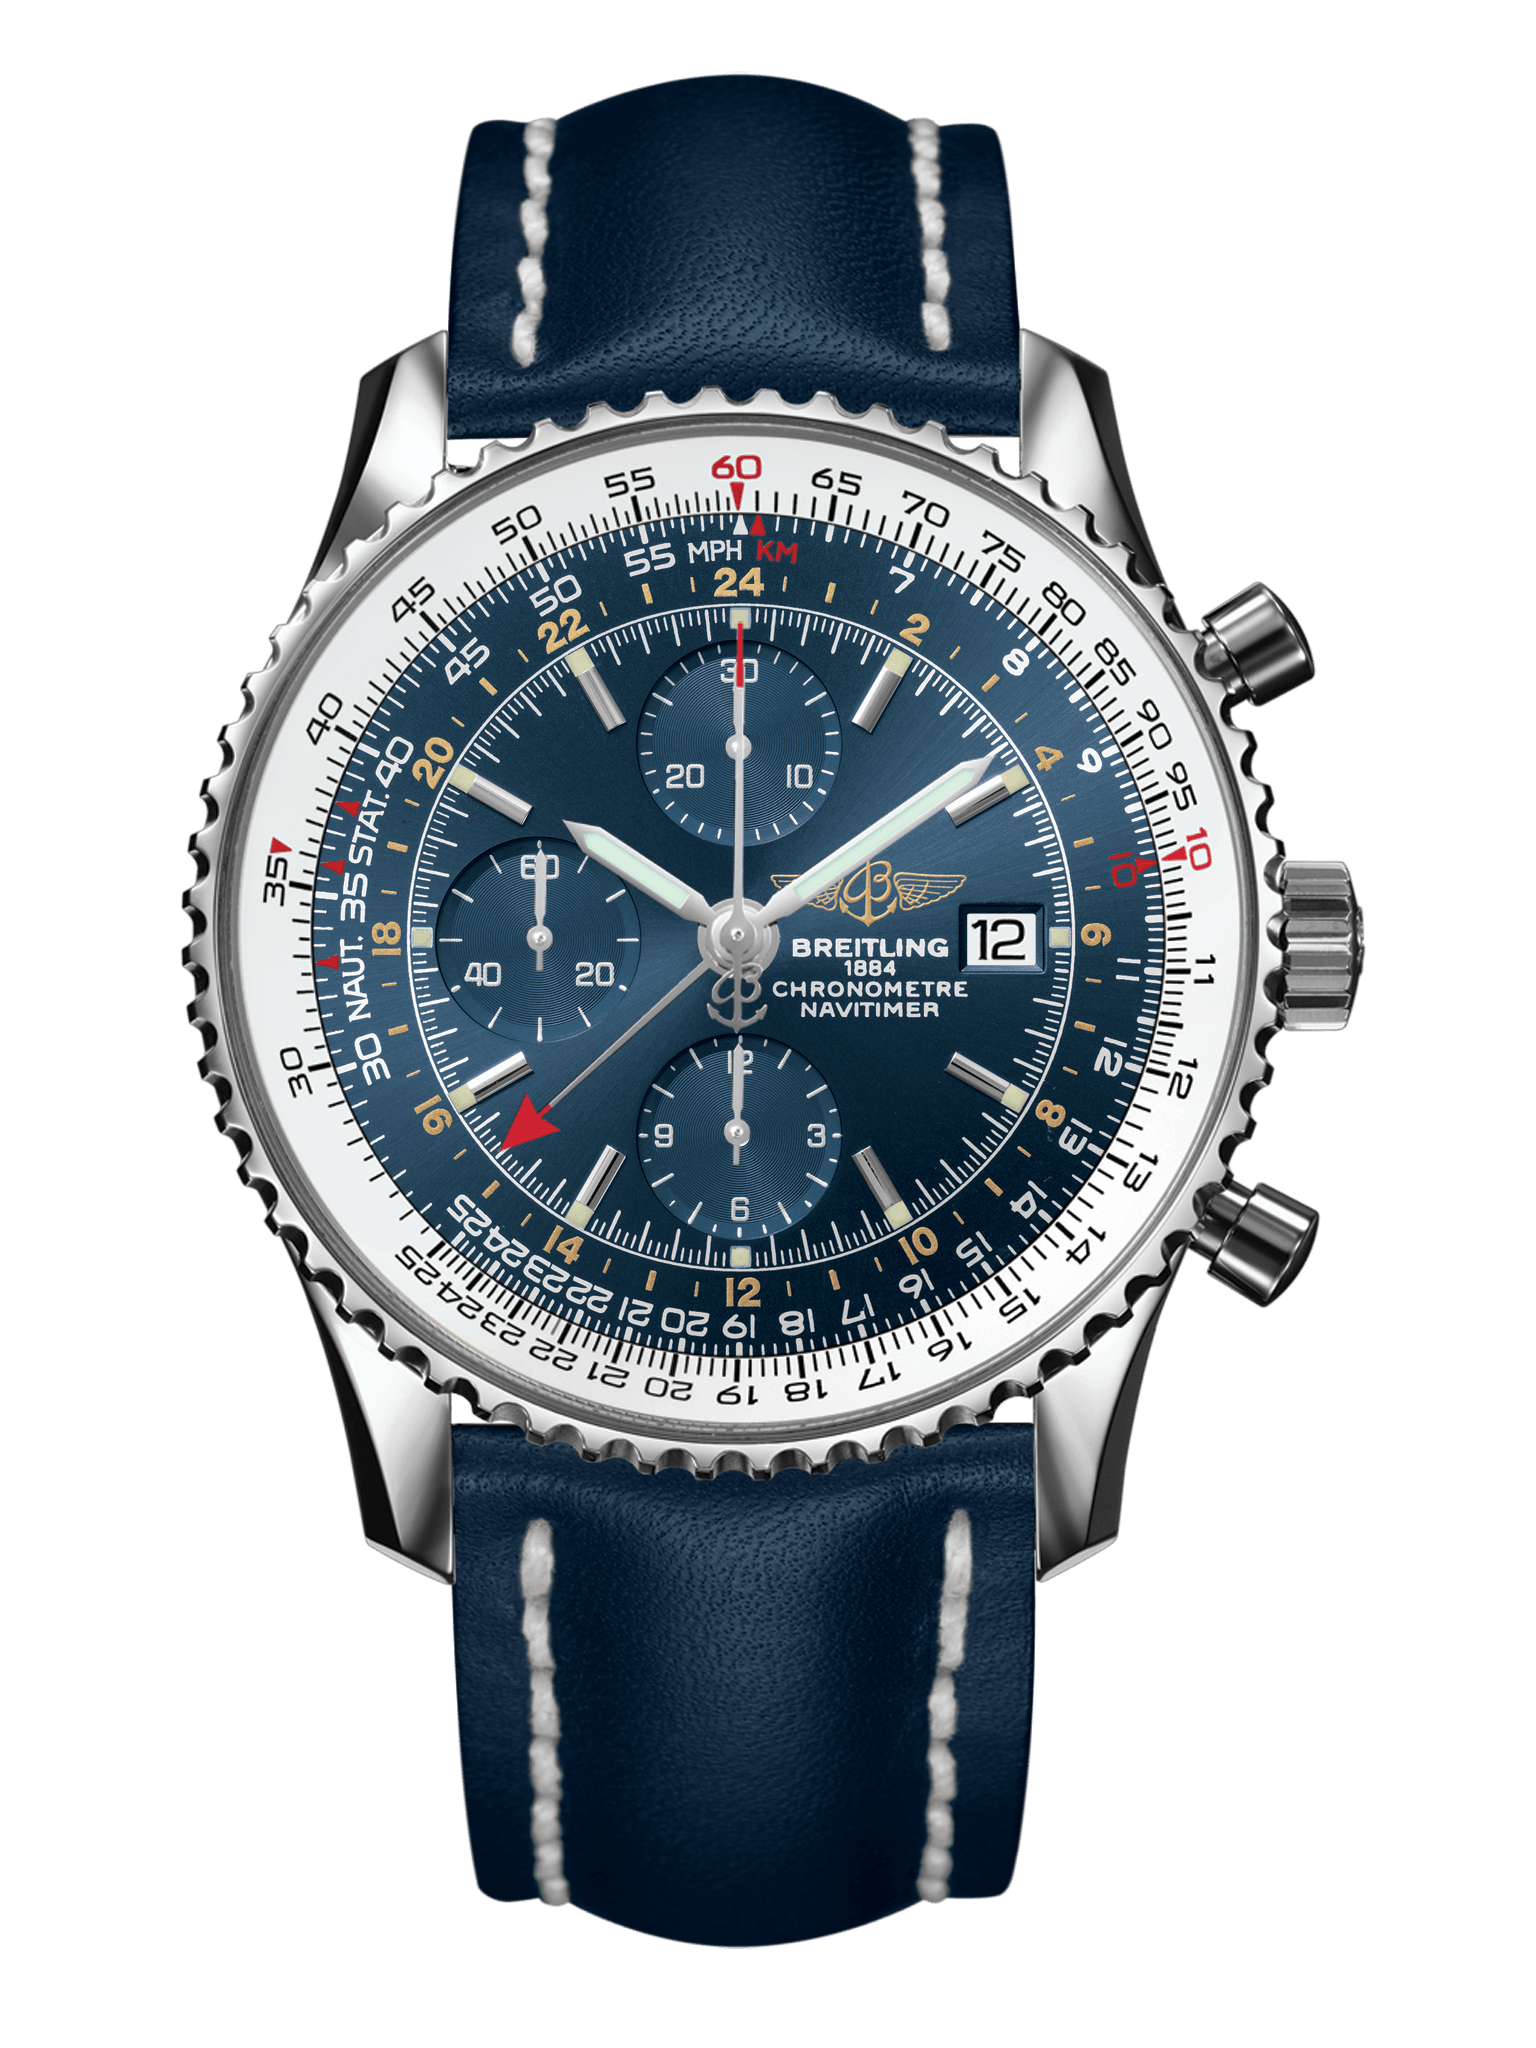 Breitling Navitimer 8 Chronograph 43 Reference. A13314101C1A1breitling Navitimer 8 Chronograph 43 Reference A13314101C1X1